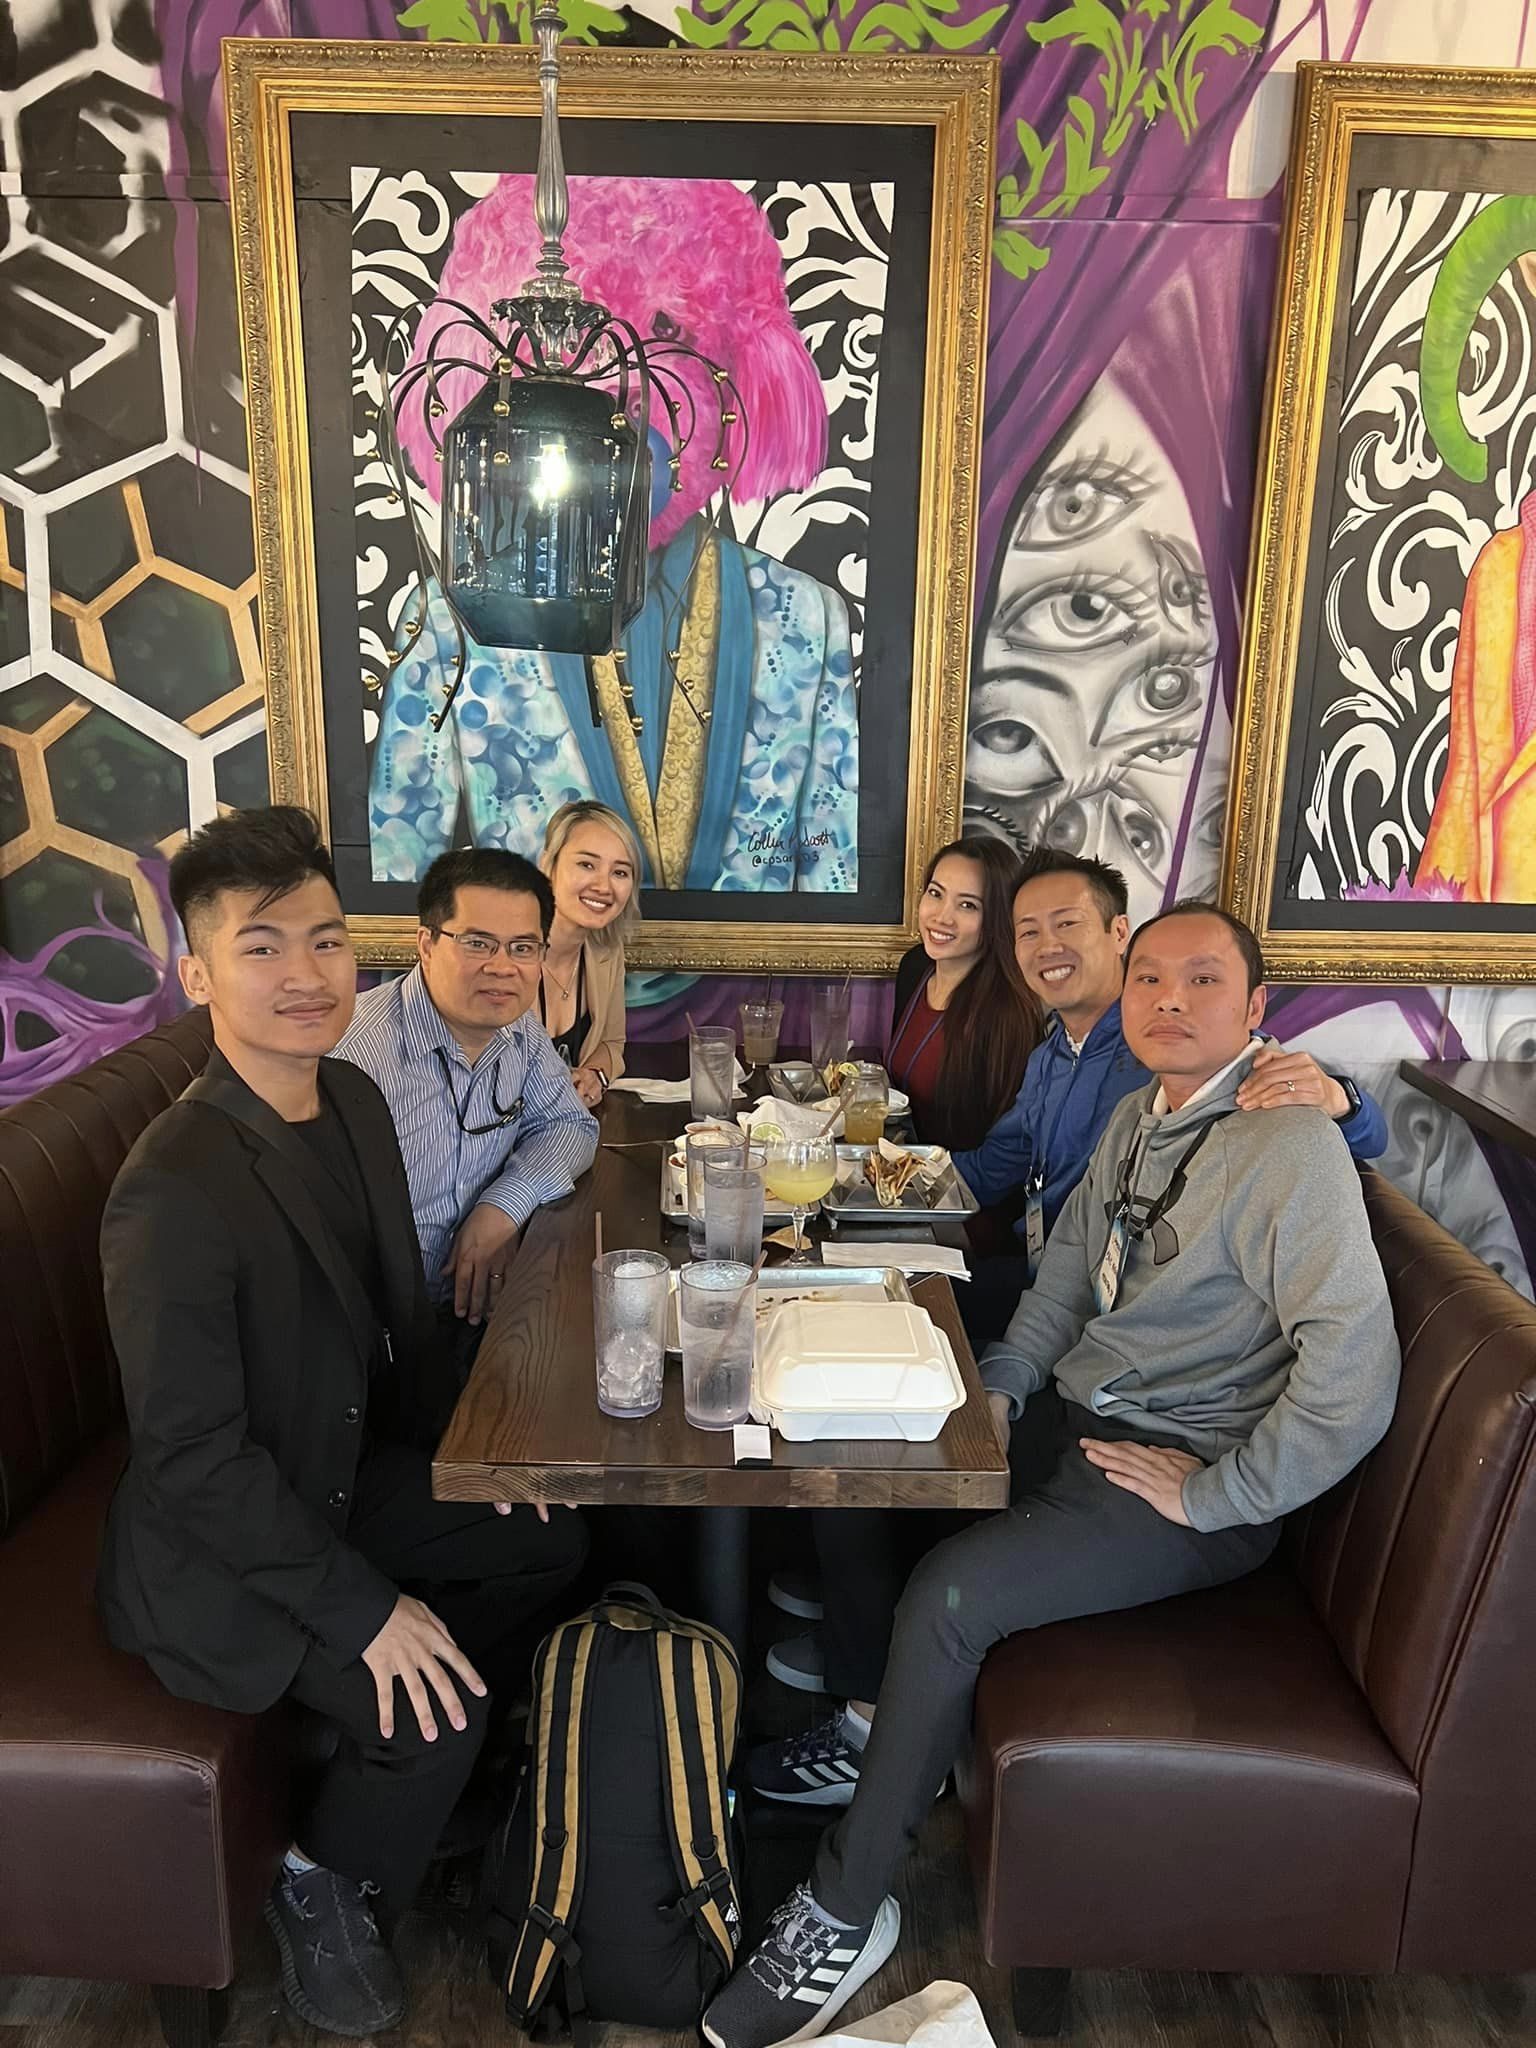 Going to lunch with a group of Vietnamese seller friends. There are 3 people at this table who are 7-figure sellers. Can you guess who they are?